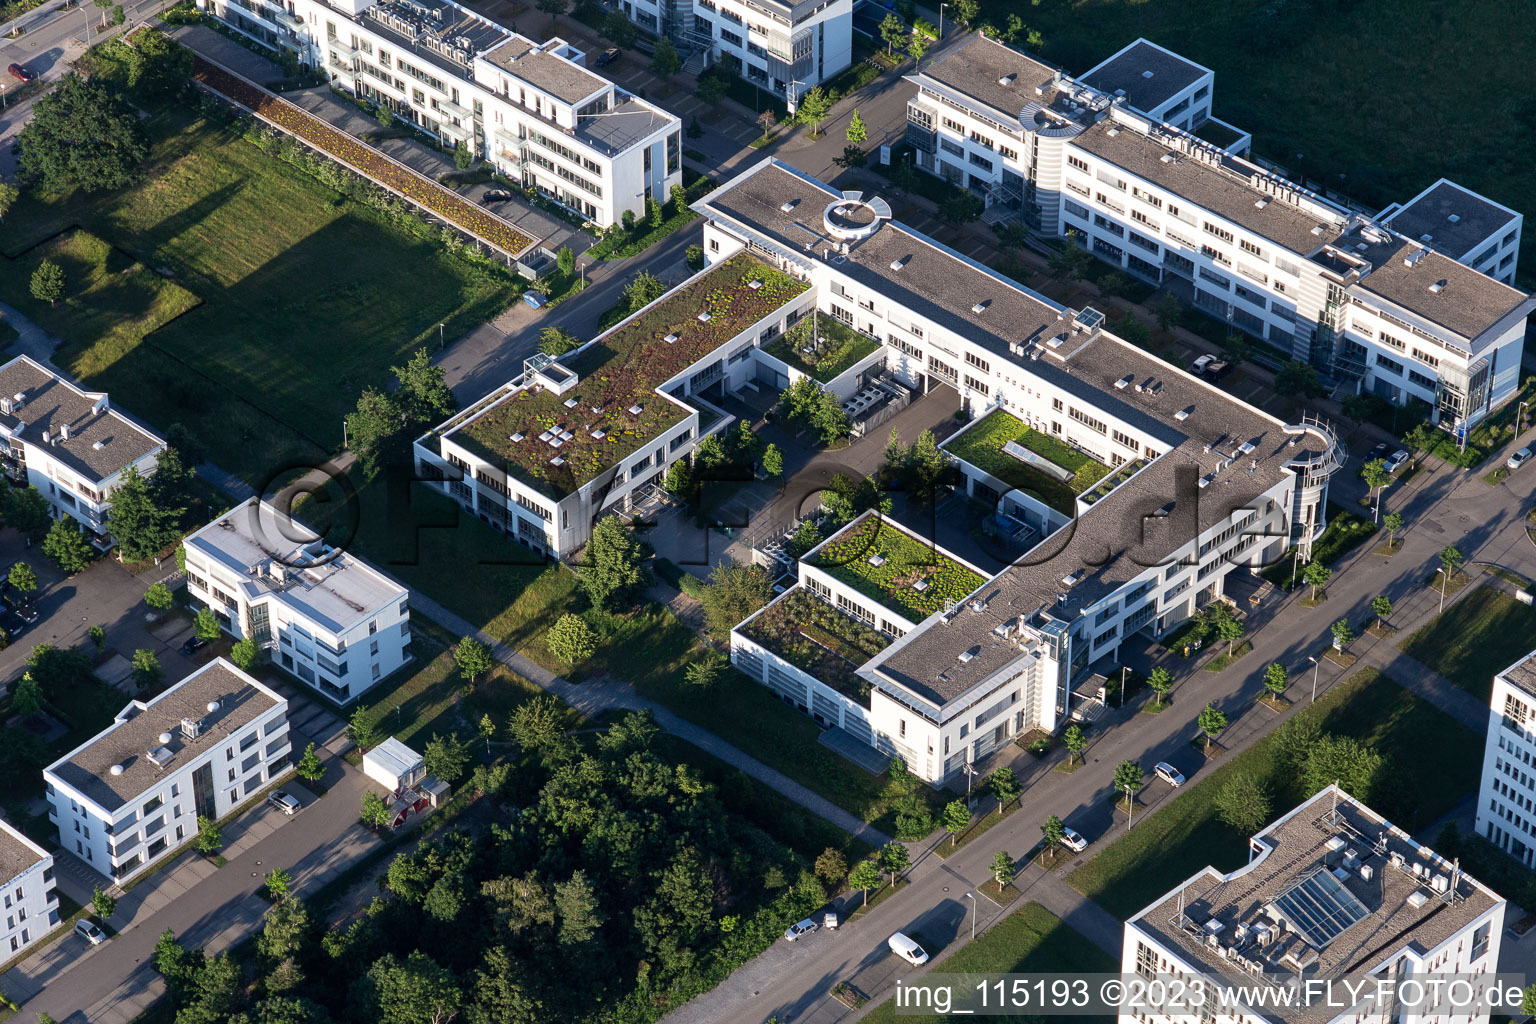 Technology Park in the district Rintheim in Karlsruhe in the state Baden-Wuerttemberg, Germany seen from above